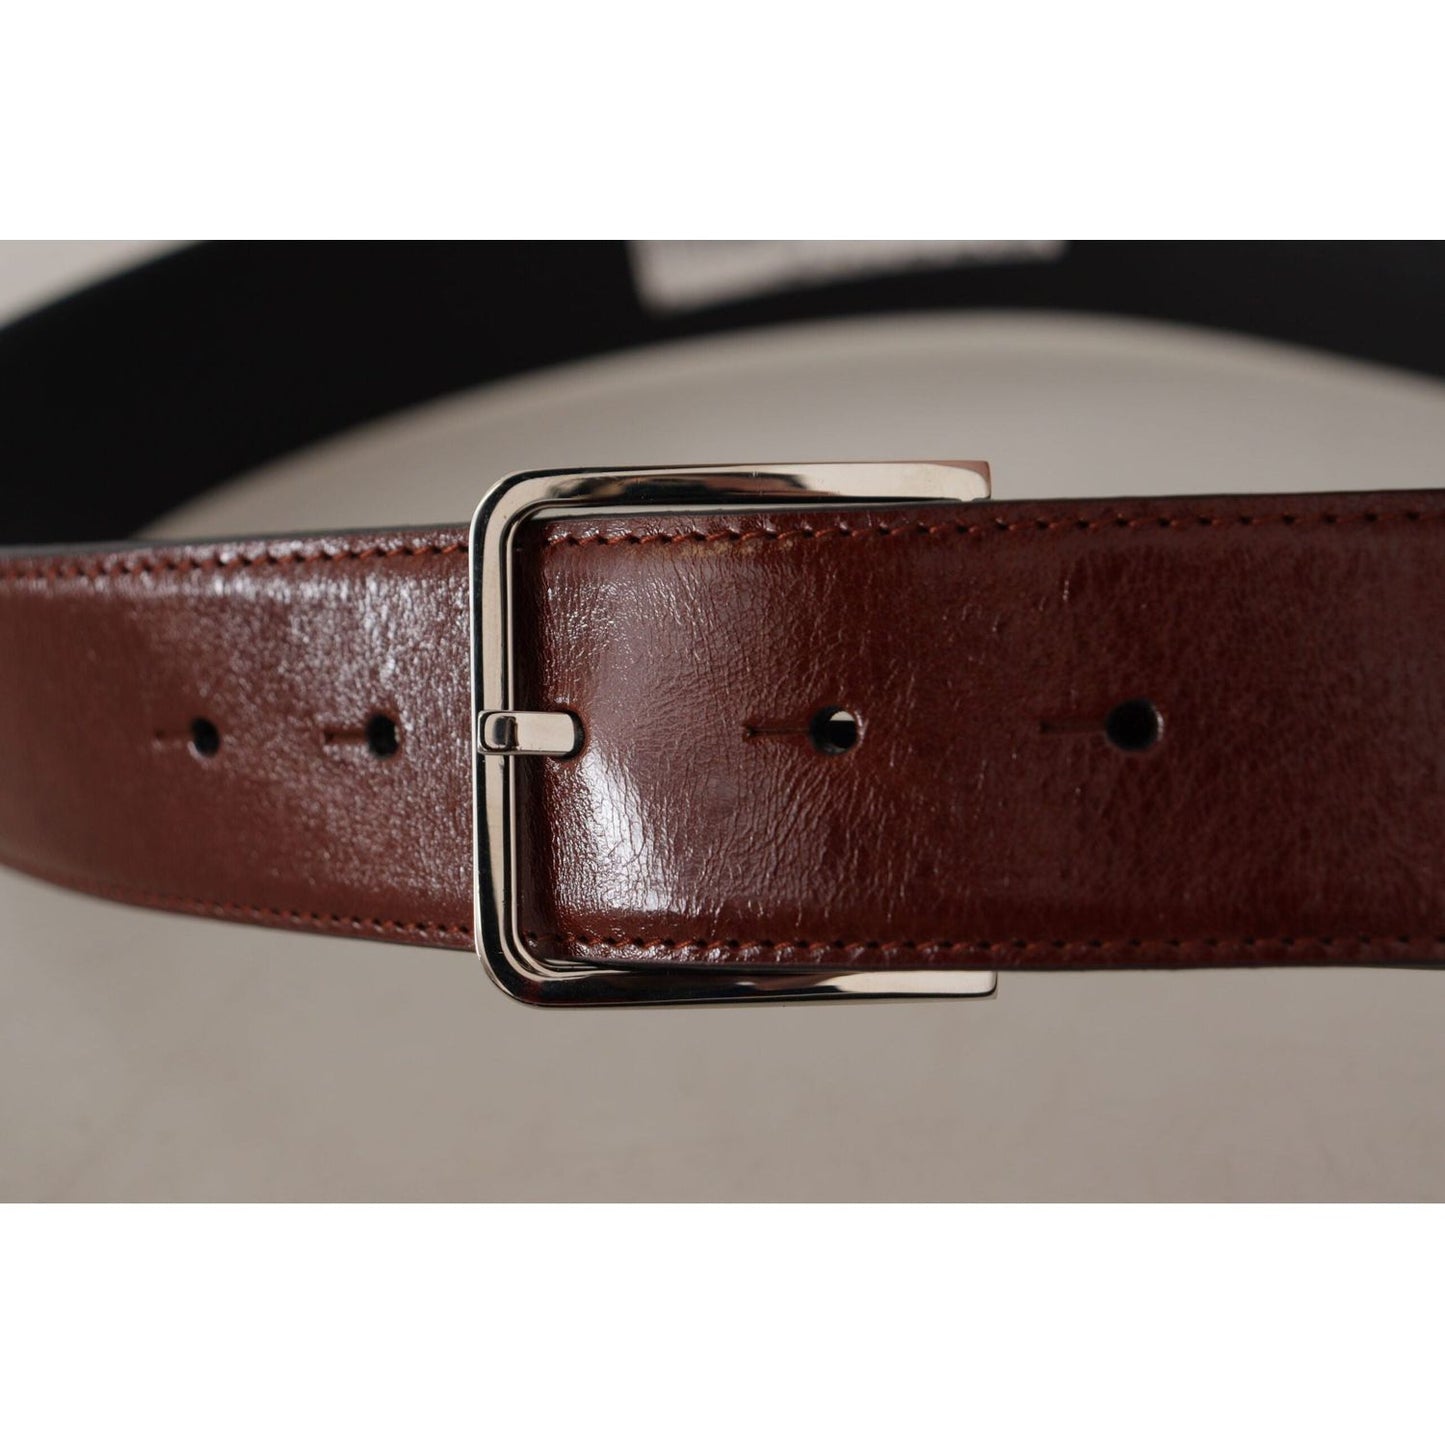 Dolce & Gabbana Elegant Leather Belt with Engraved Buckle bordeaux-calf-patent-leather-logo-waist-buckle-belt IMG_8764-scaled-720911a9-2c0.jpg